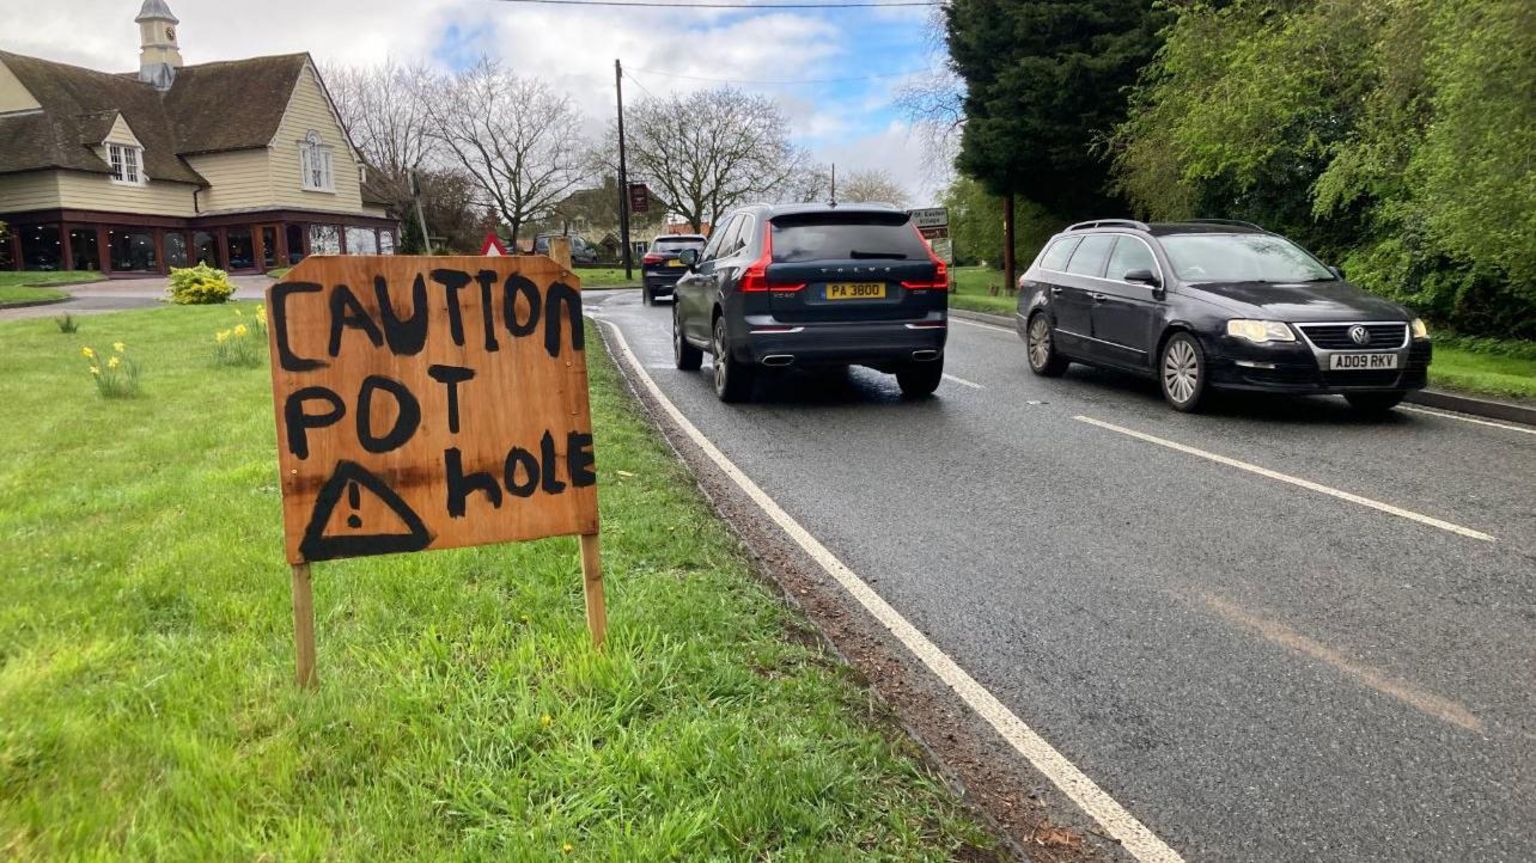 The sign reads 'caution pothole' on the side of the road to make drivers aware potholes are on the road